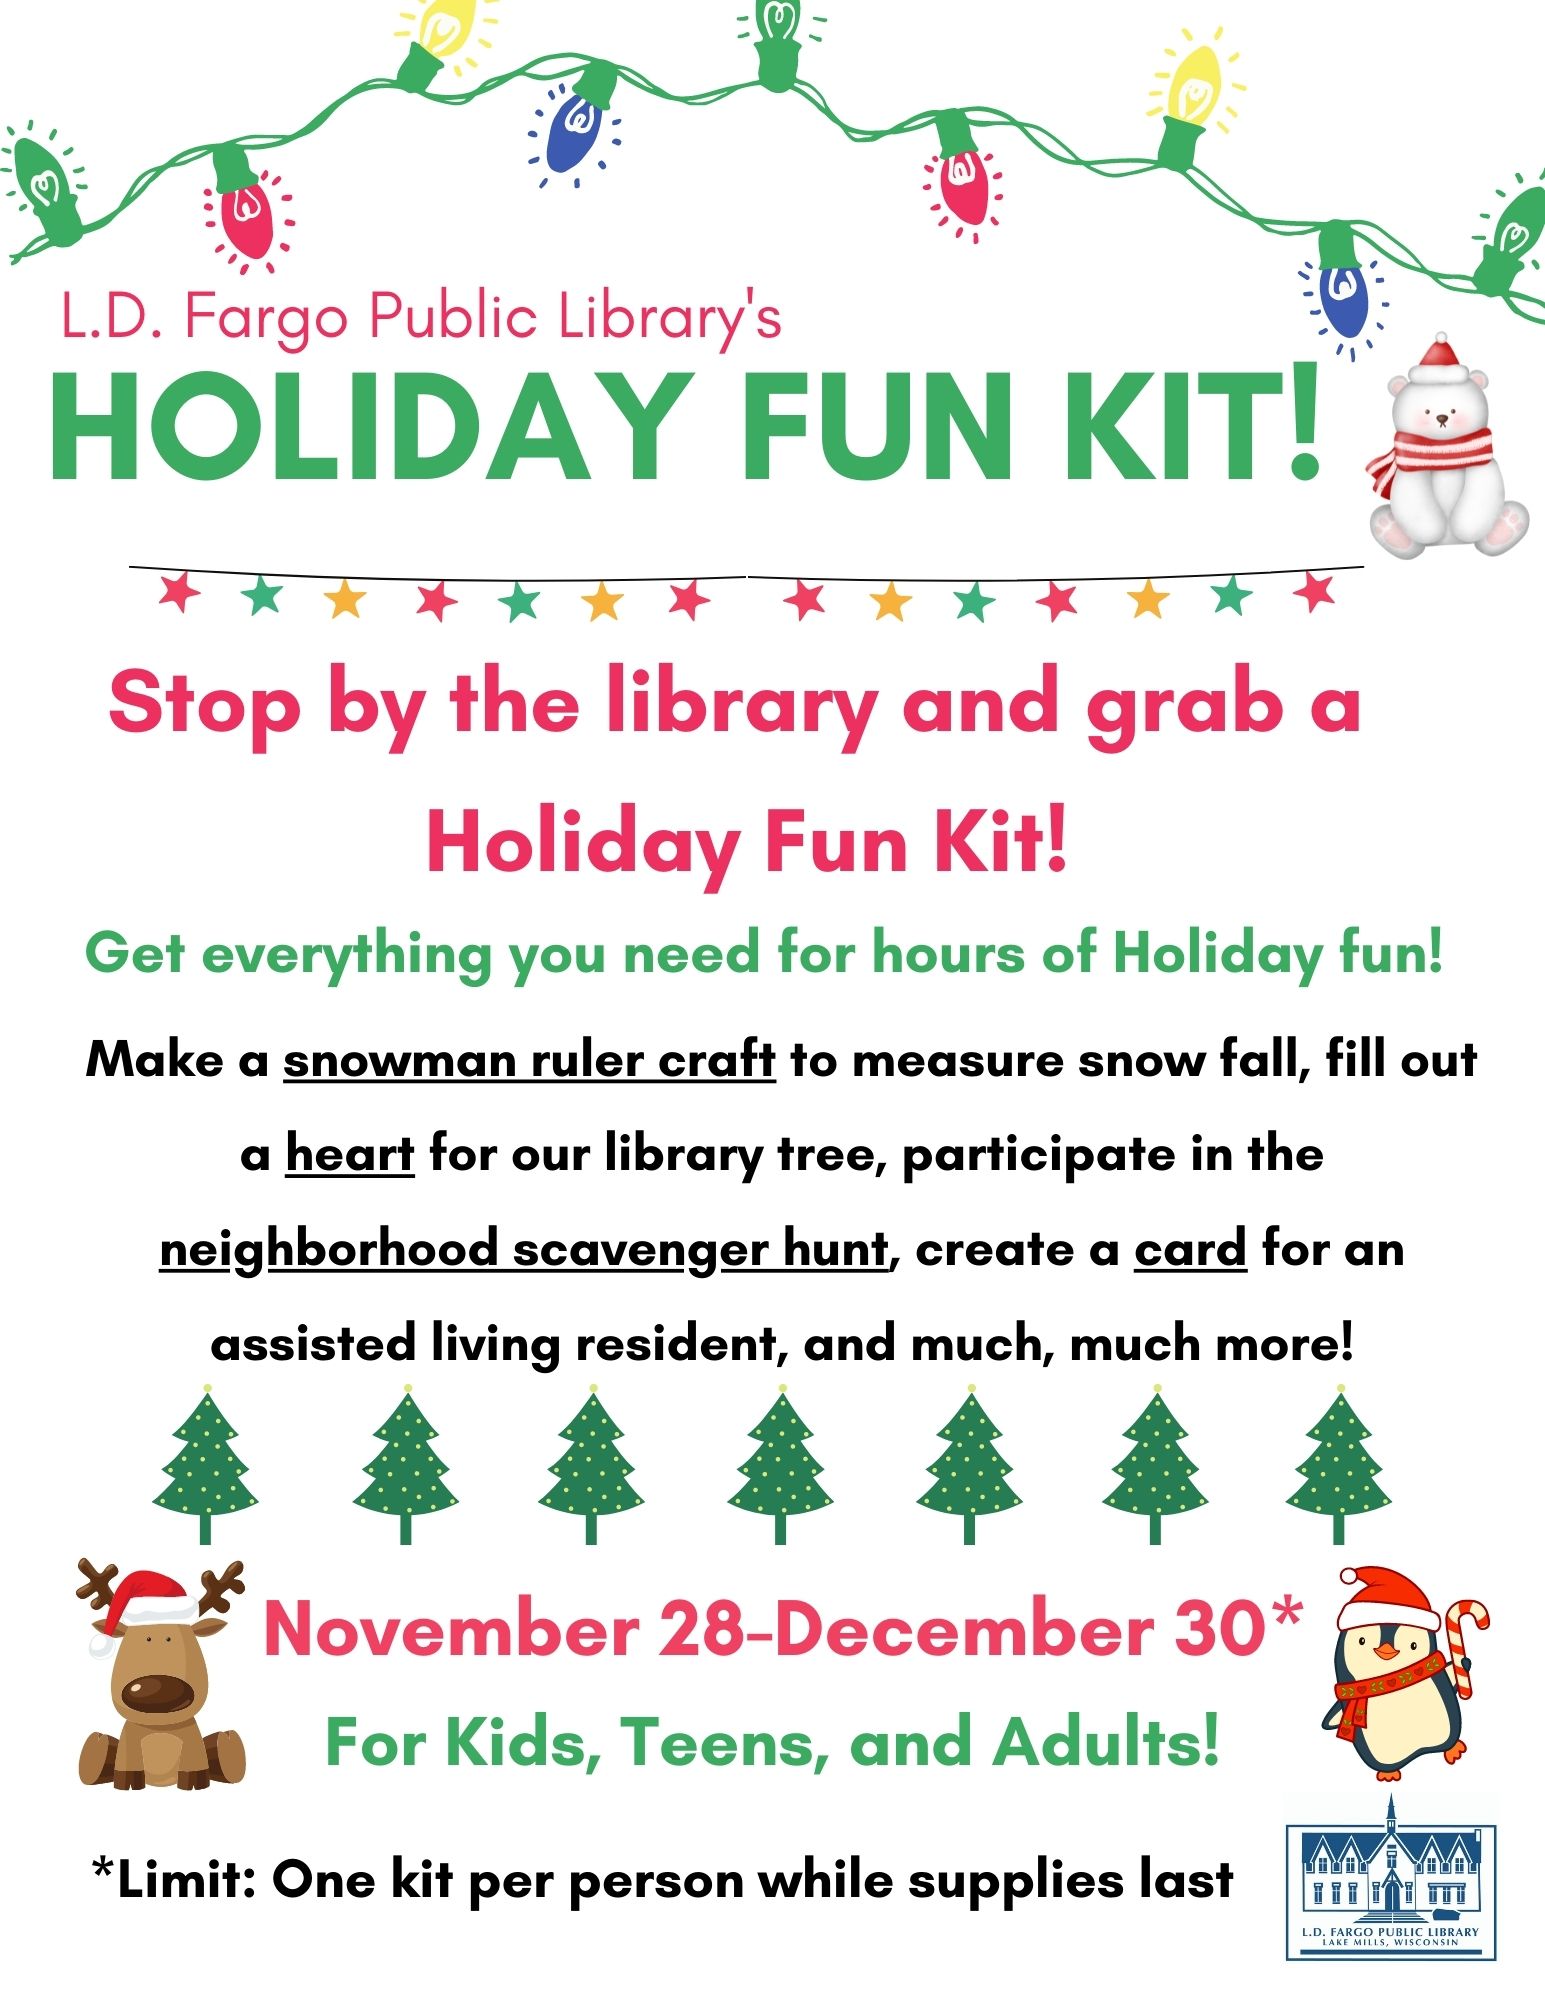 Stop by the library to pick up a Holiday Fun Kit!  Get everything you need for hours of Holiday fun!  November 28-December 30 (while supplies last).  For Kids, Teens, and Adults!